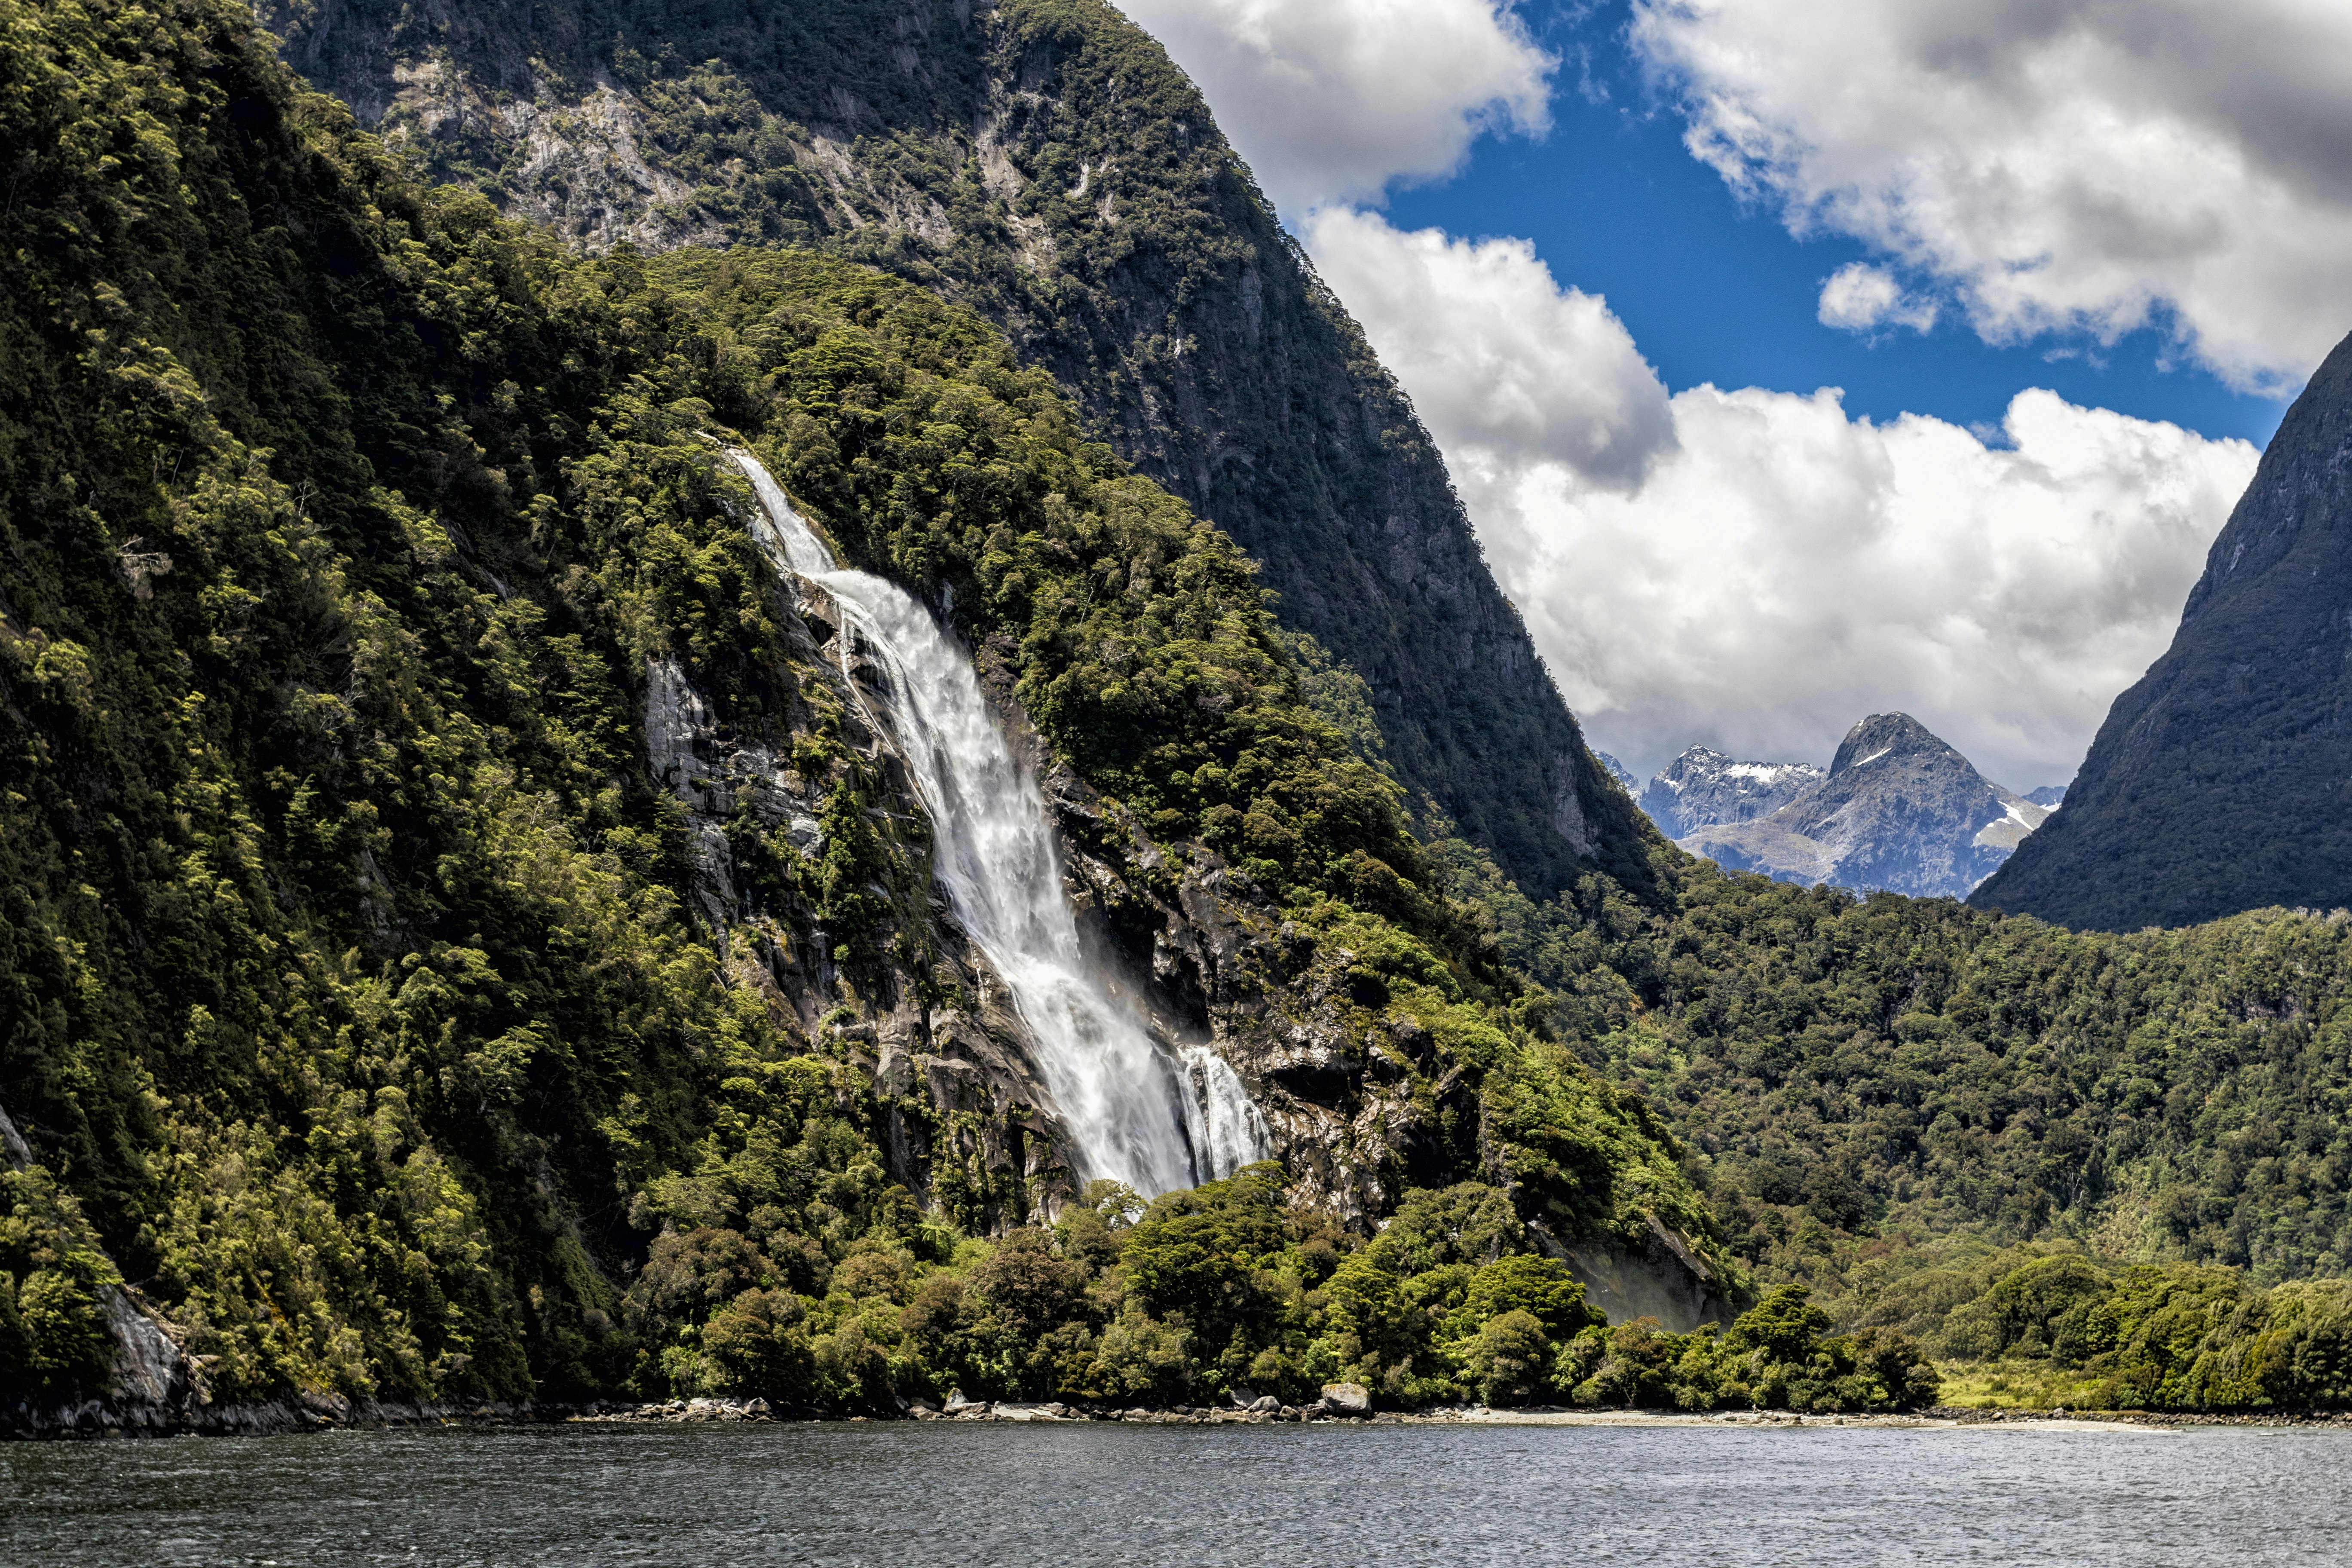 A waterfall cascades down the green flank of a mountain in New Zealand that's part of the lost Zealandia continent. Blue mountains rise even higher in the distance